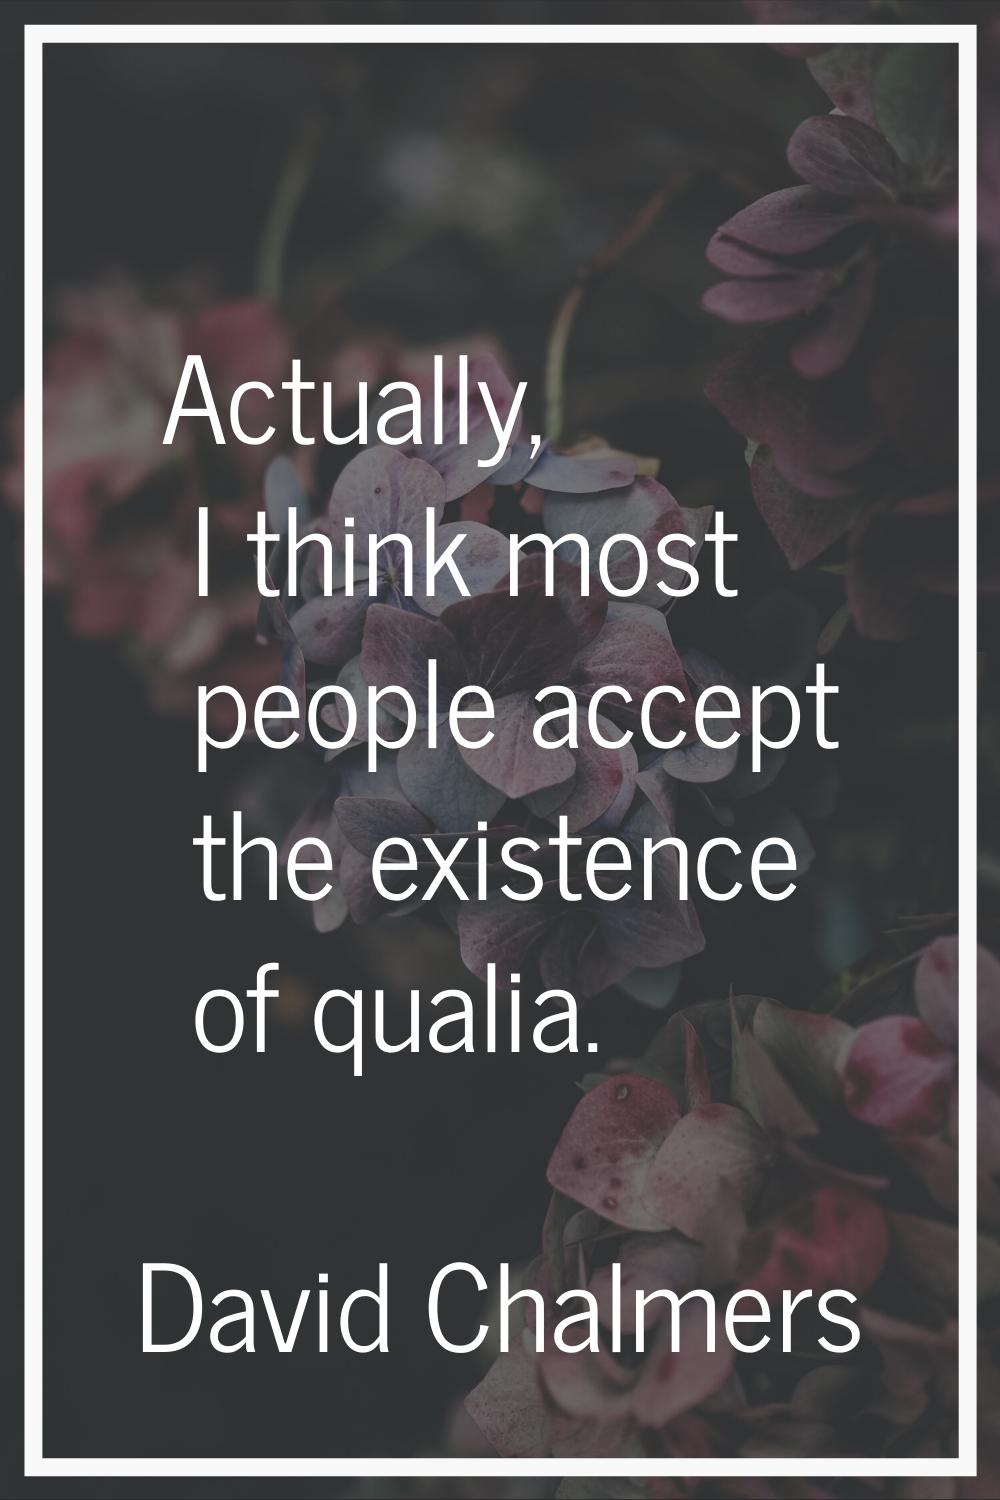 Actually, I think most people accept the existence of qualia.